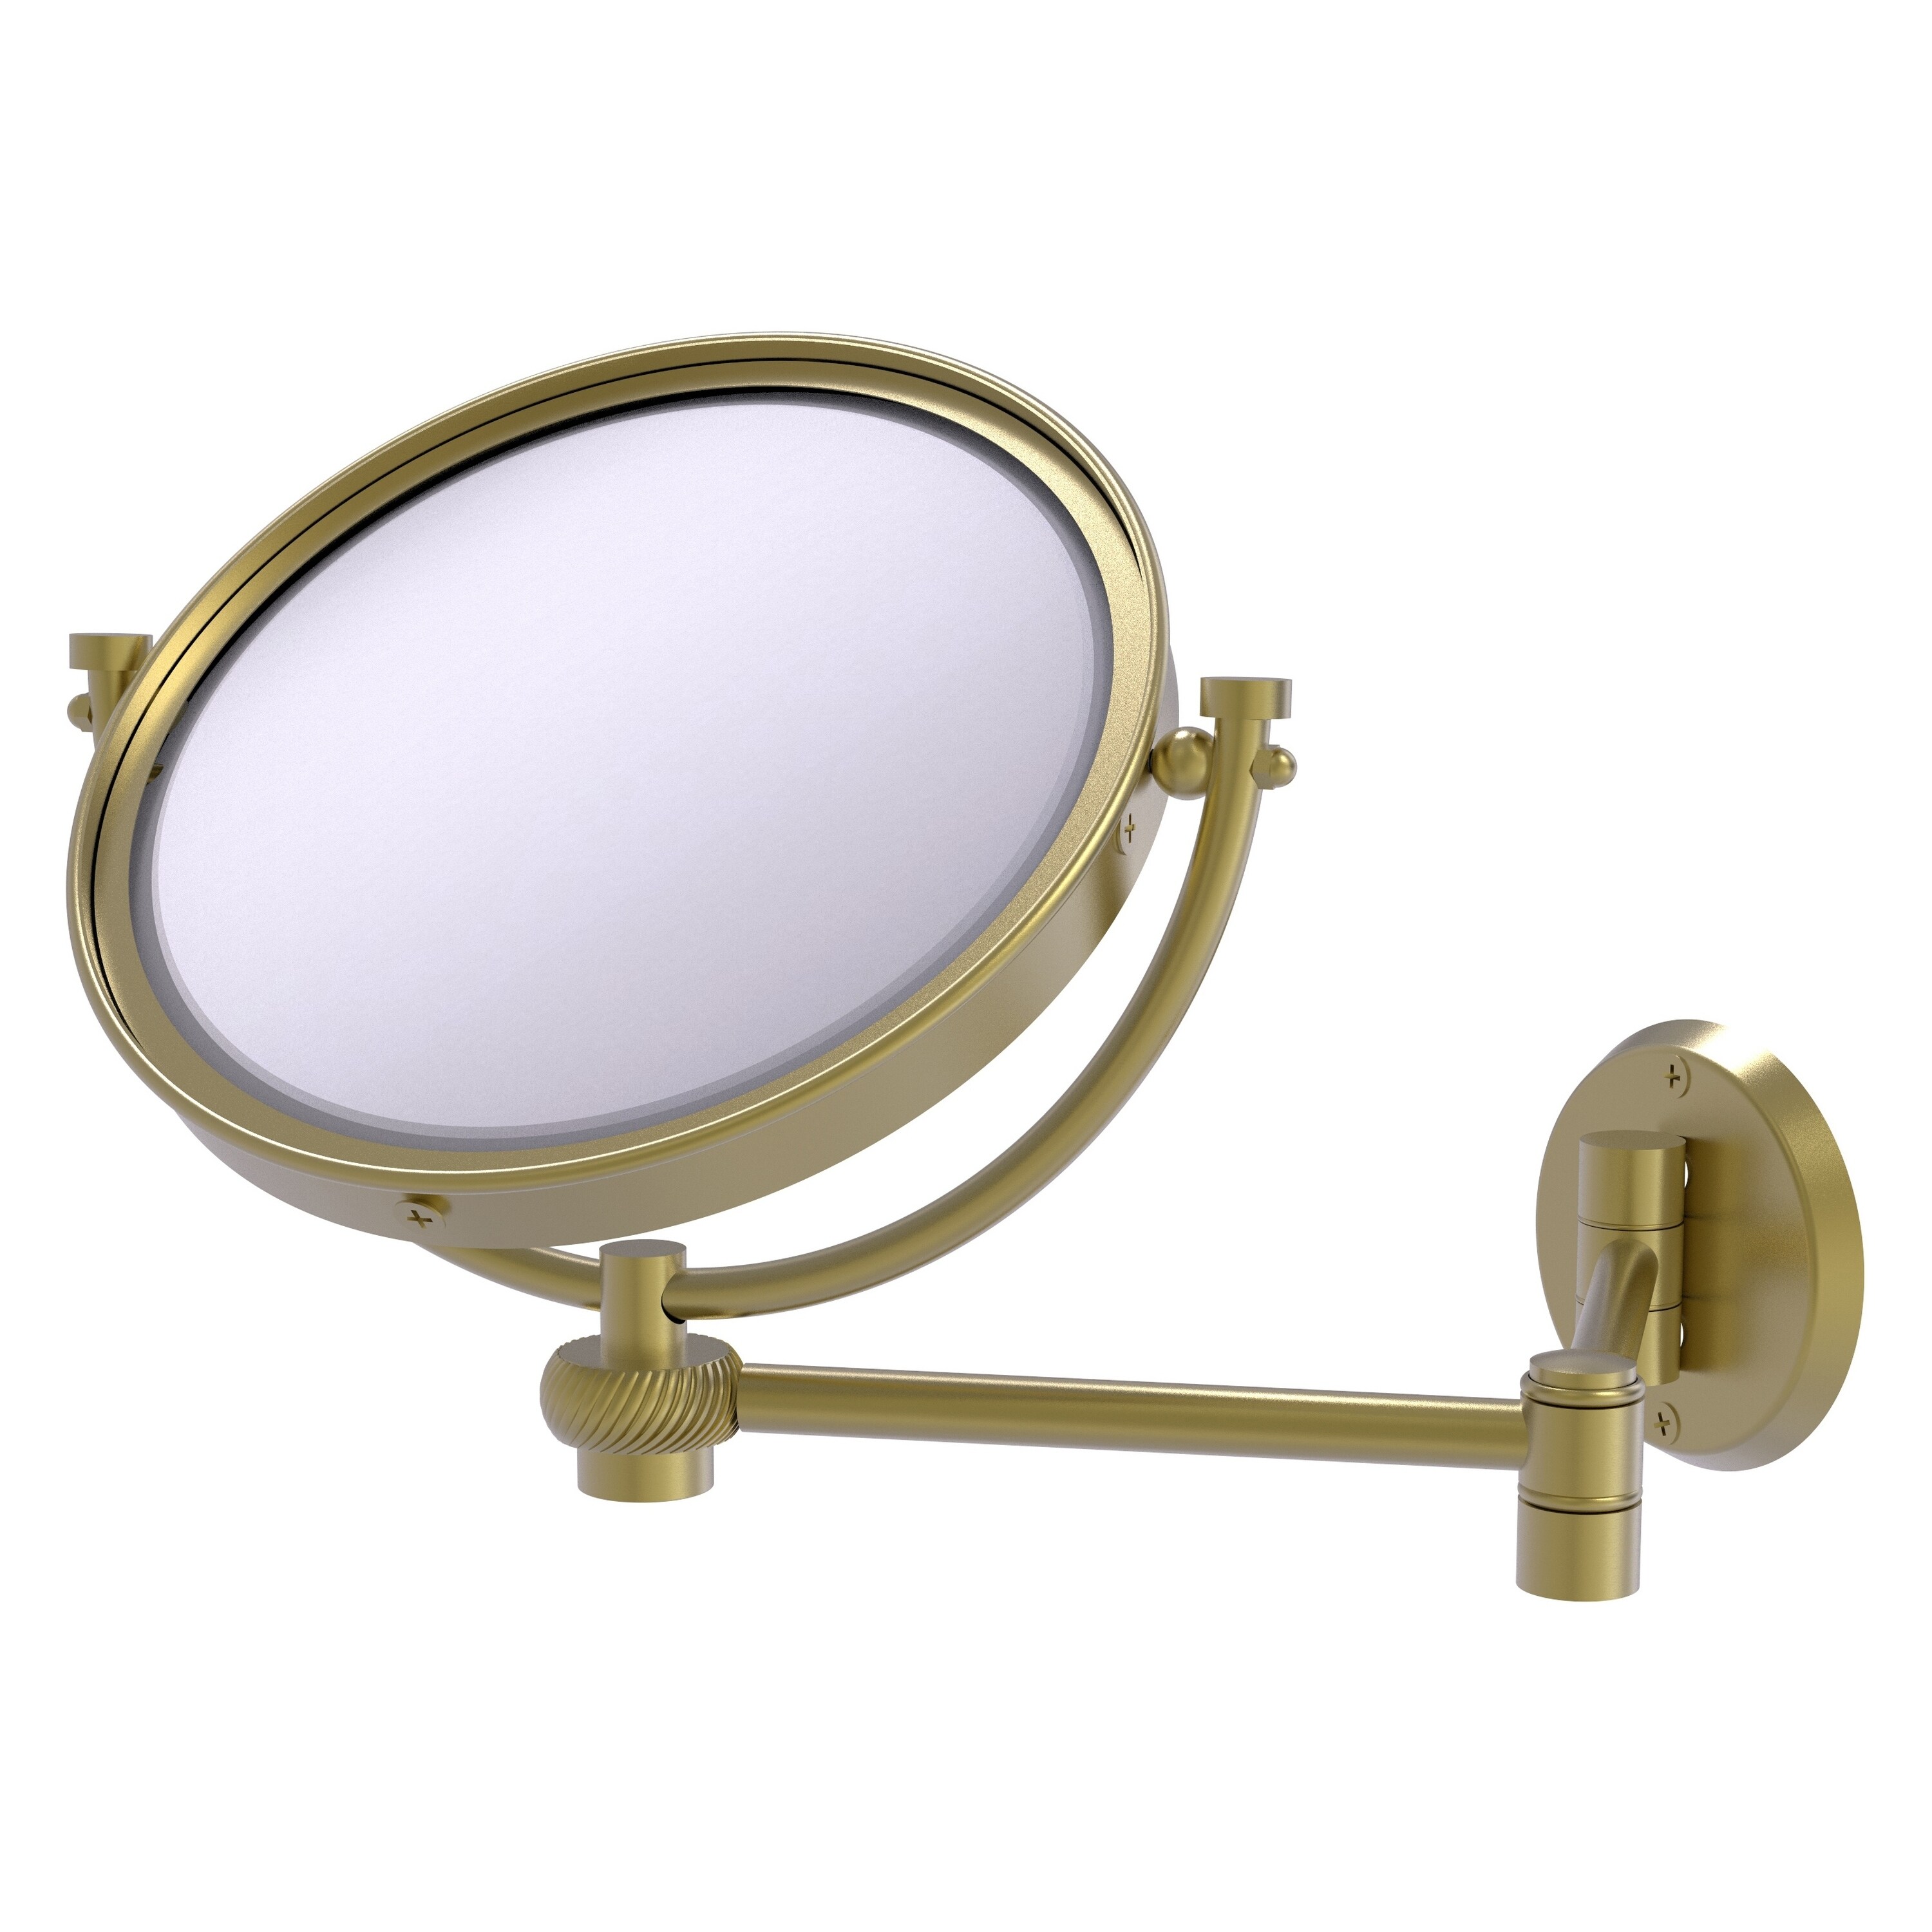 8-in x 10-in Satin Chrome Double-sided 3X Magnifying Wall-mounted Vanity Mirror | - Allied Brass WM-6T/3X-SBR